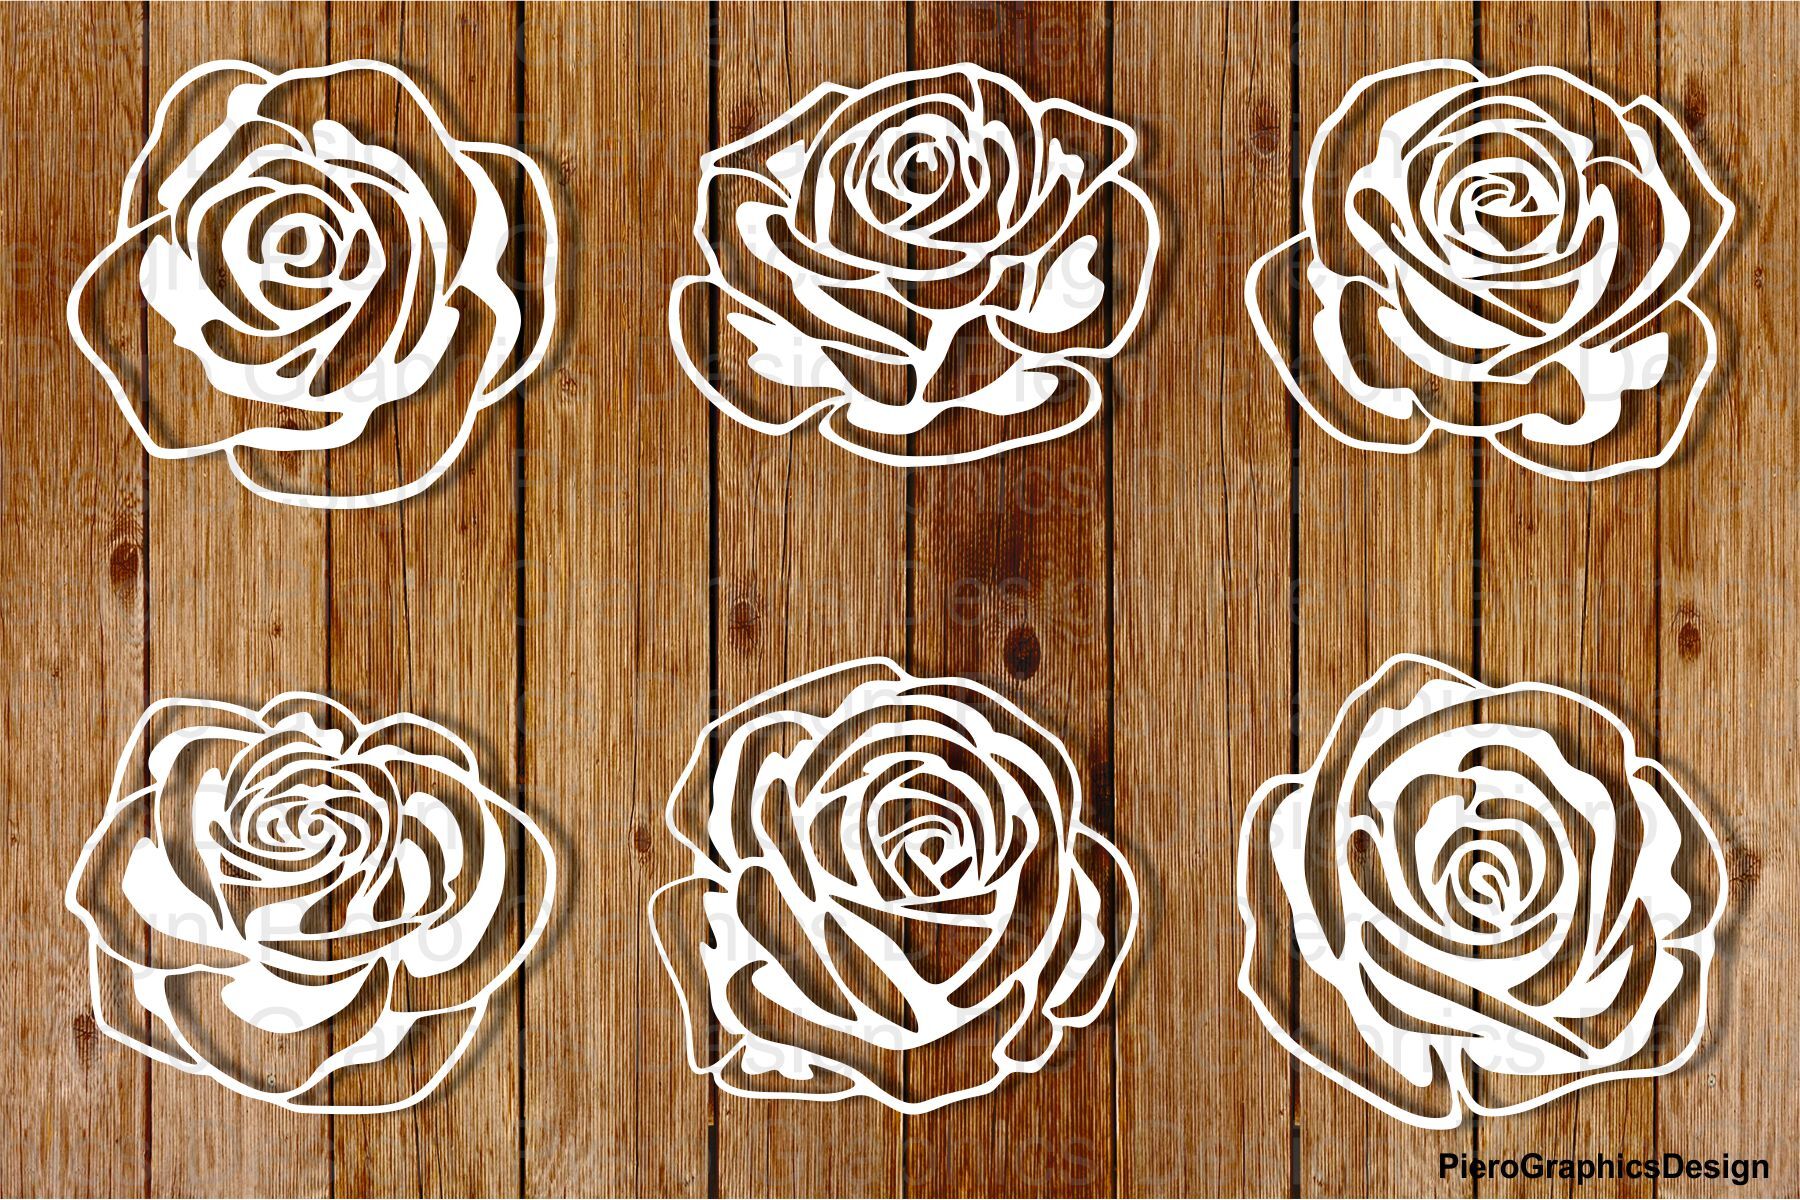 Roses and Stencil SVG files for Silhouette Cameo and Cricut. By  PieroGraphicsDesign